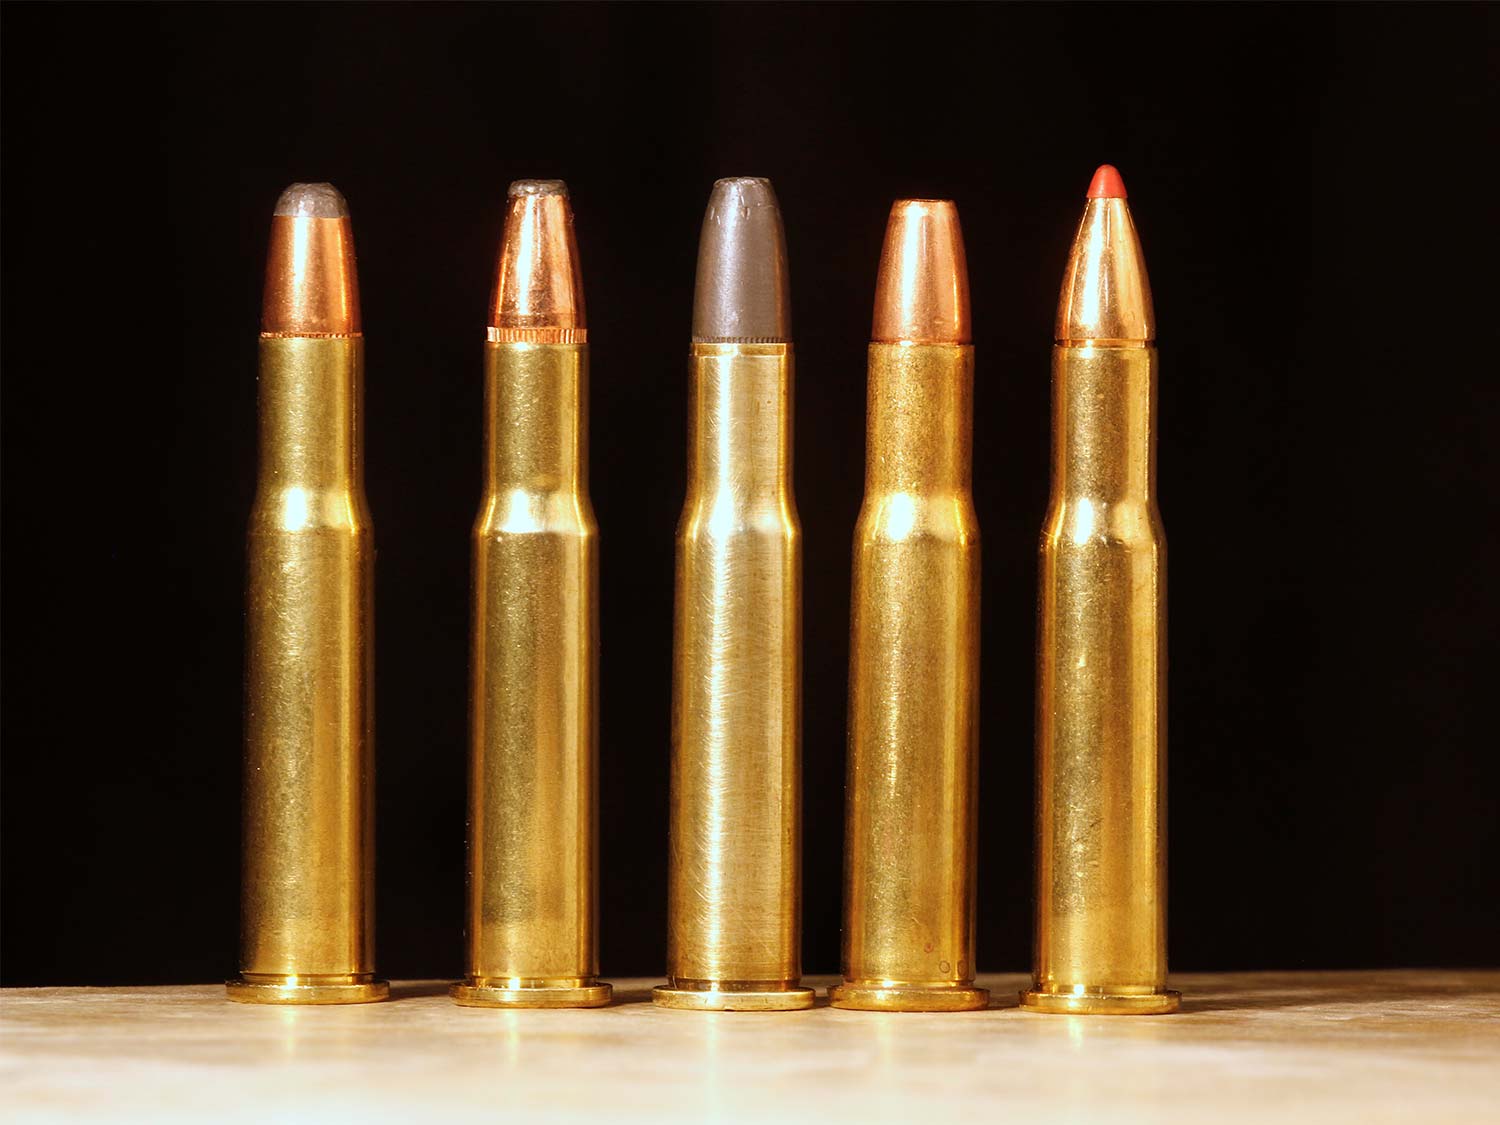 A lineup of rifle ammo.